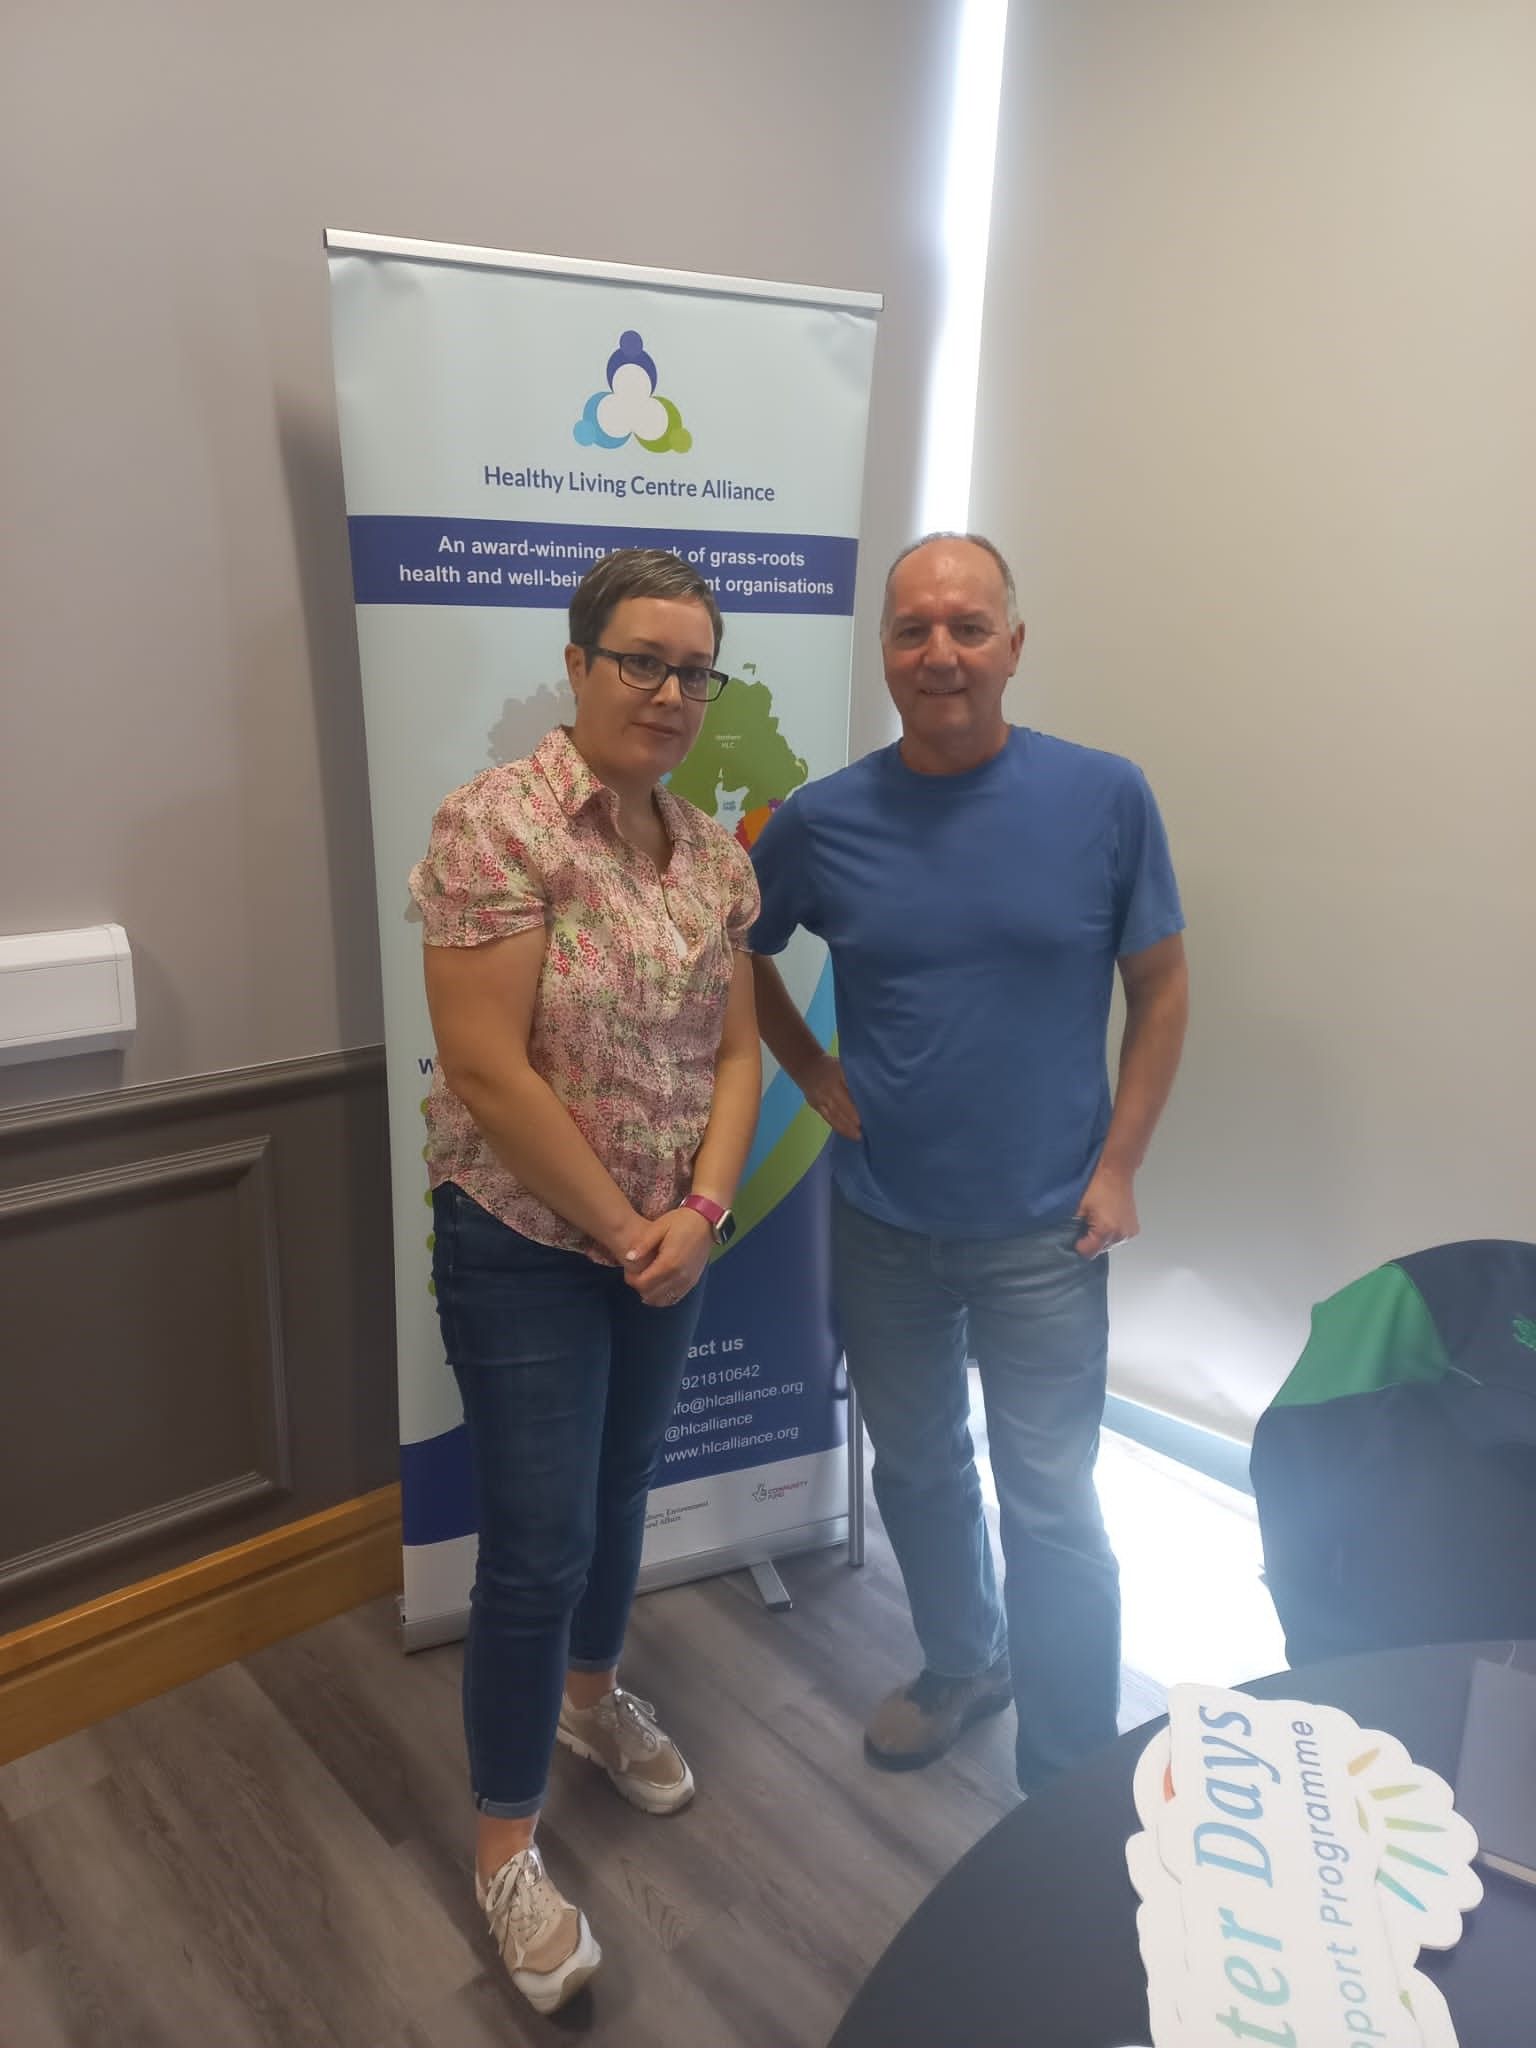 PARTNERSHIP: Karen Hall, Head of Northern Ireland at Mental Health Foundation, and Tony Doherty, Director of Healthy Living Centres Alliance